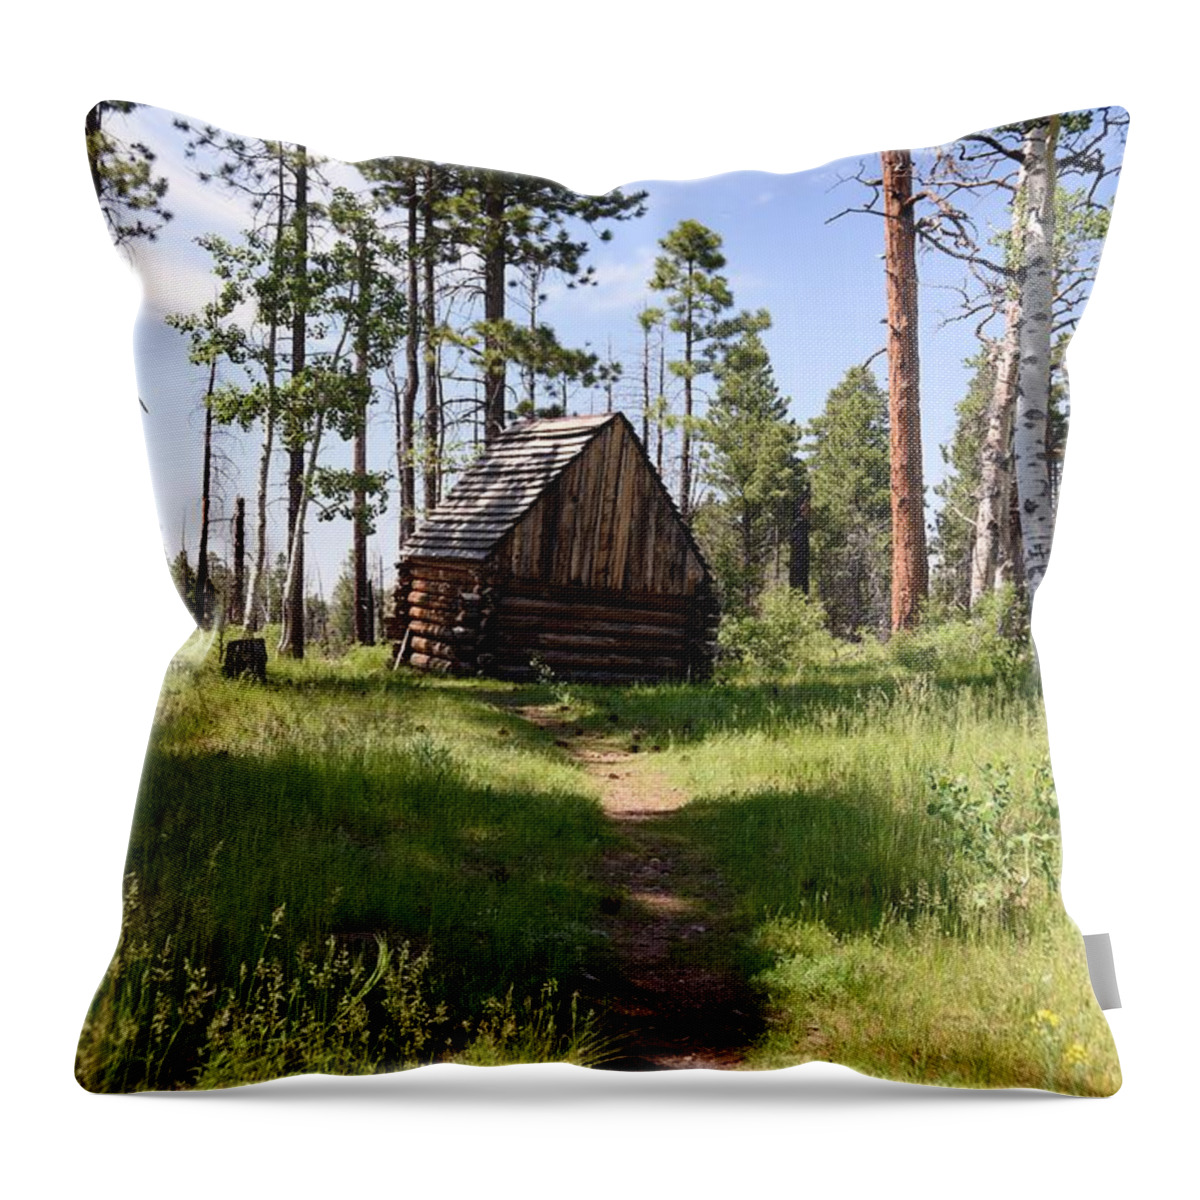 Photograph Throw Pillow featuring the photograph Cabin in the Woods by Richard Gehlbach